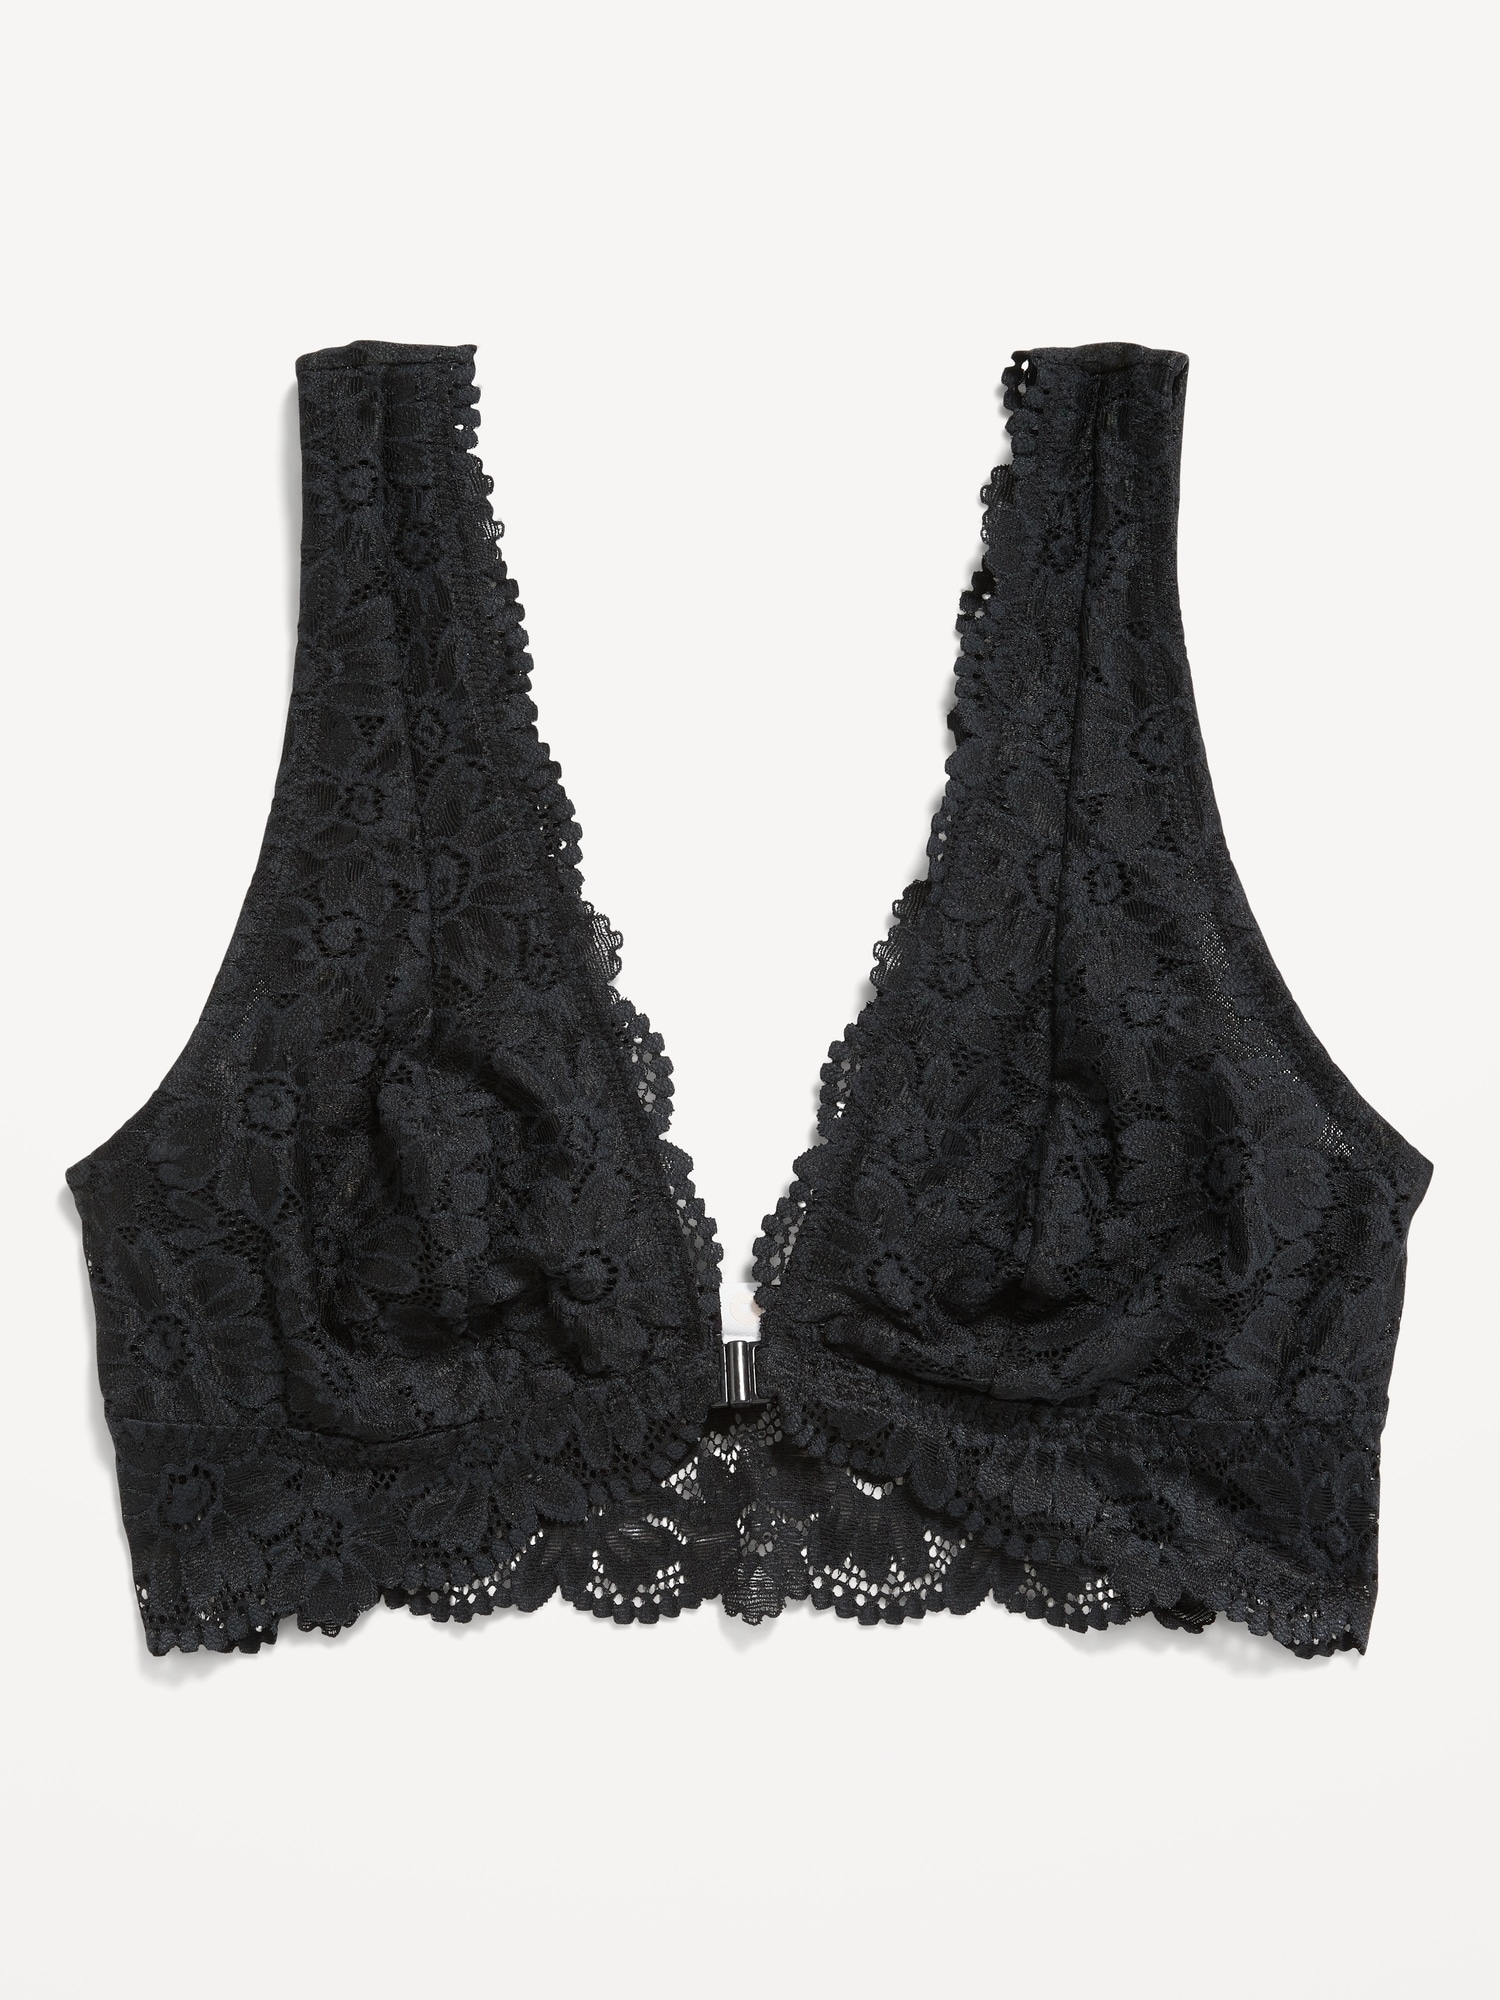 H&M Red Lace Bralette - Big Cup Little Cup